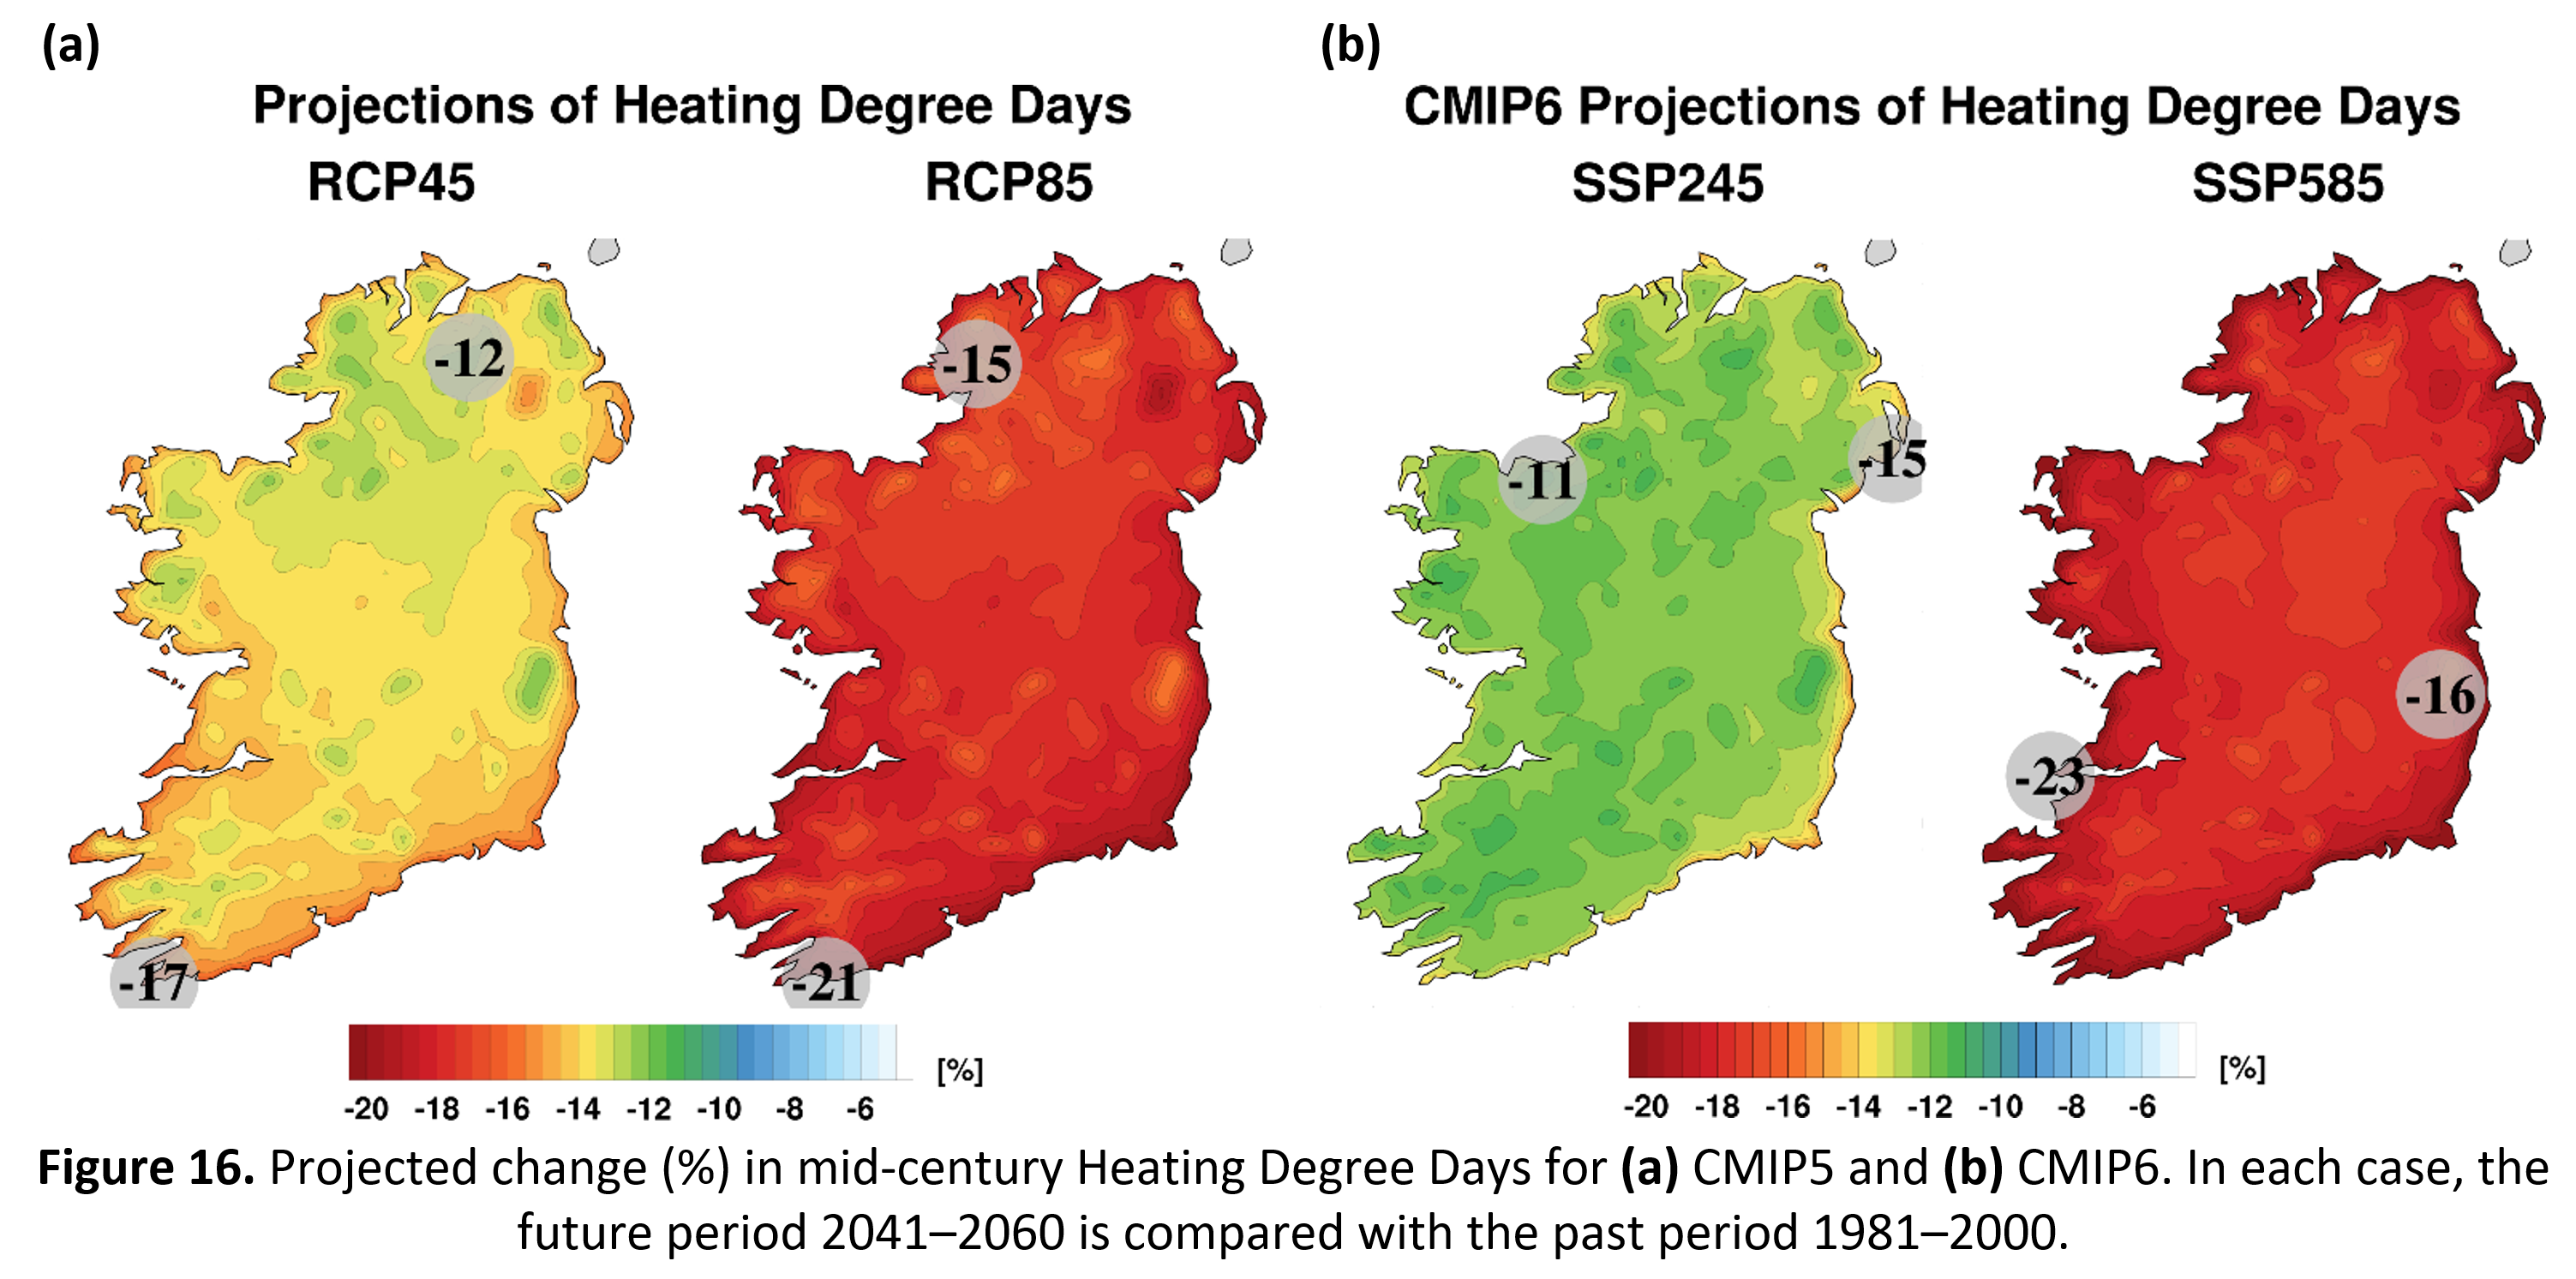 Figure 16. Projected change (%) in mid-century Heating Degree Days for (a) CMIP5 and (b) CMIP6. In each case, the future period 2041–2060 is compared with the past period 1981–2000.